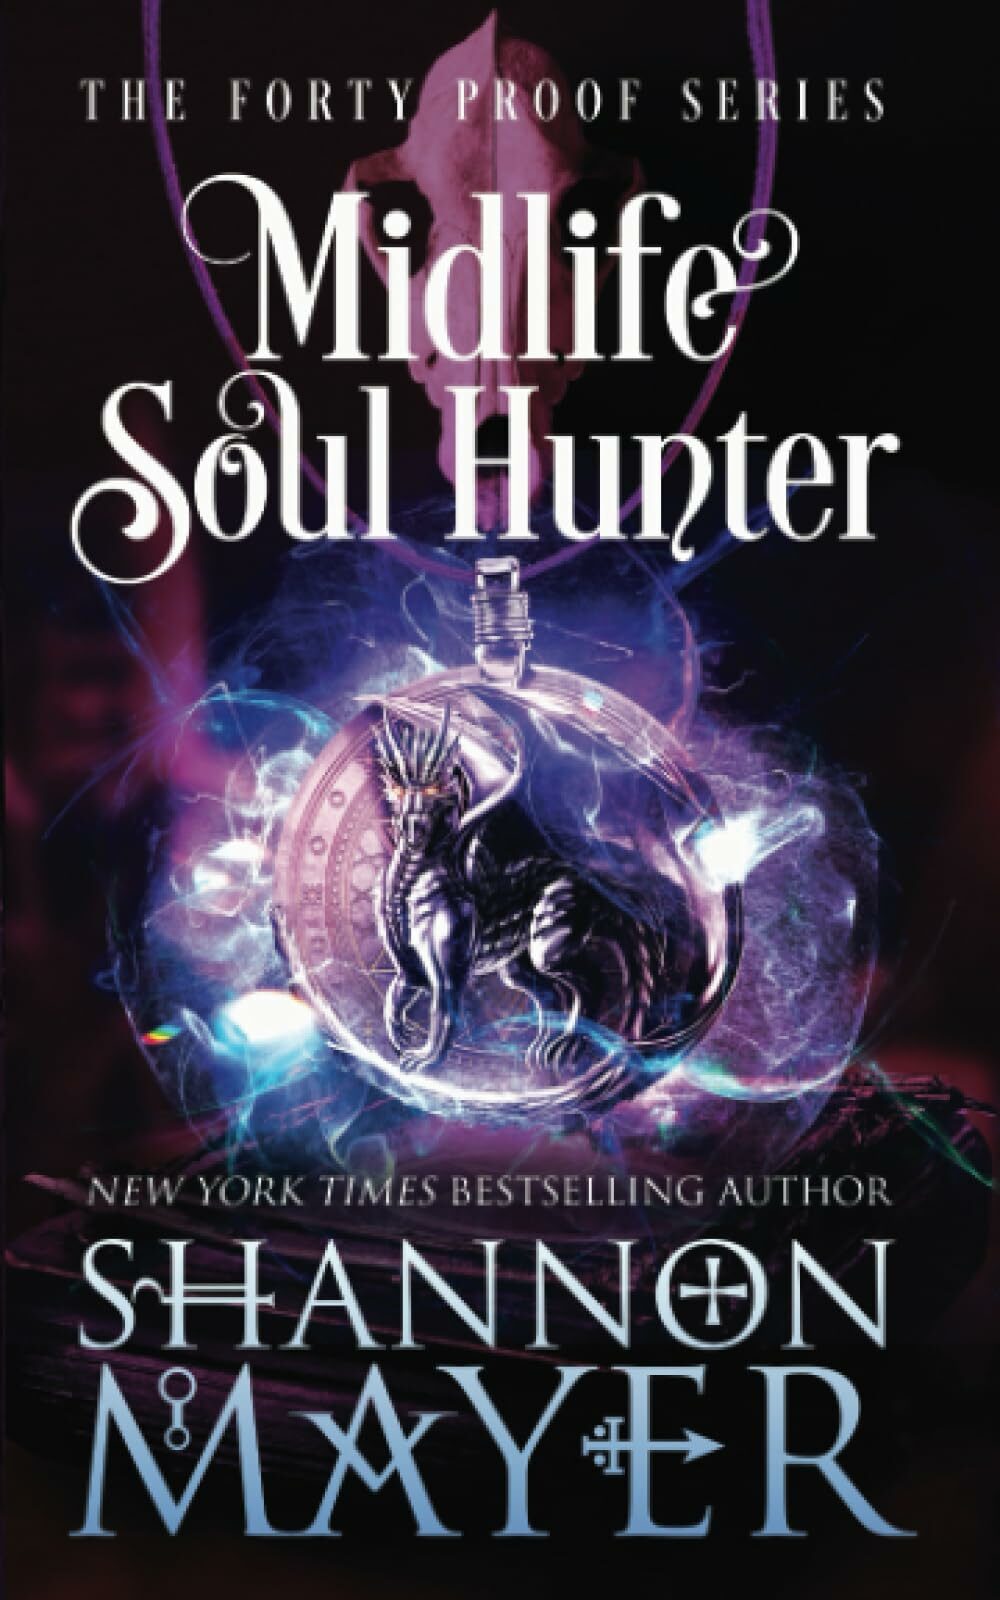 Midlife Soul Hunter (The Forty Proof Series #8)